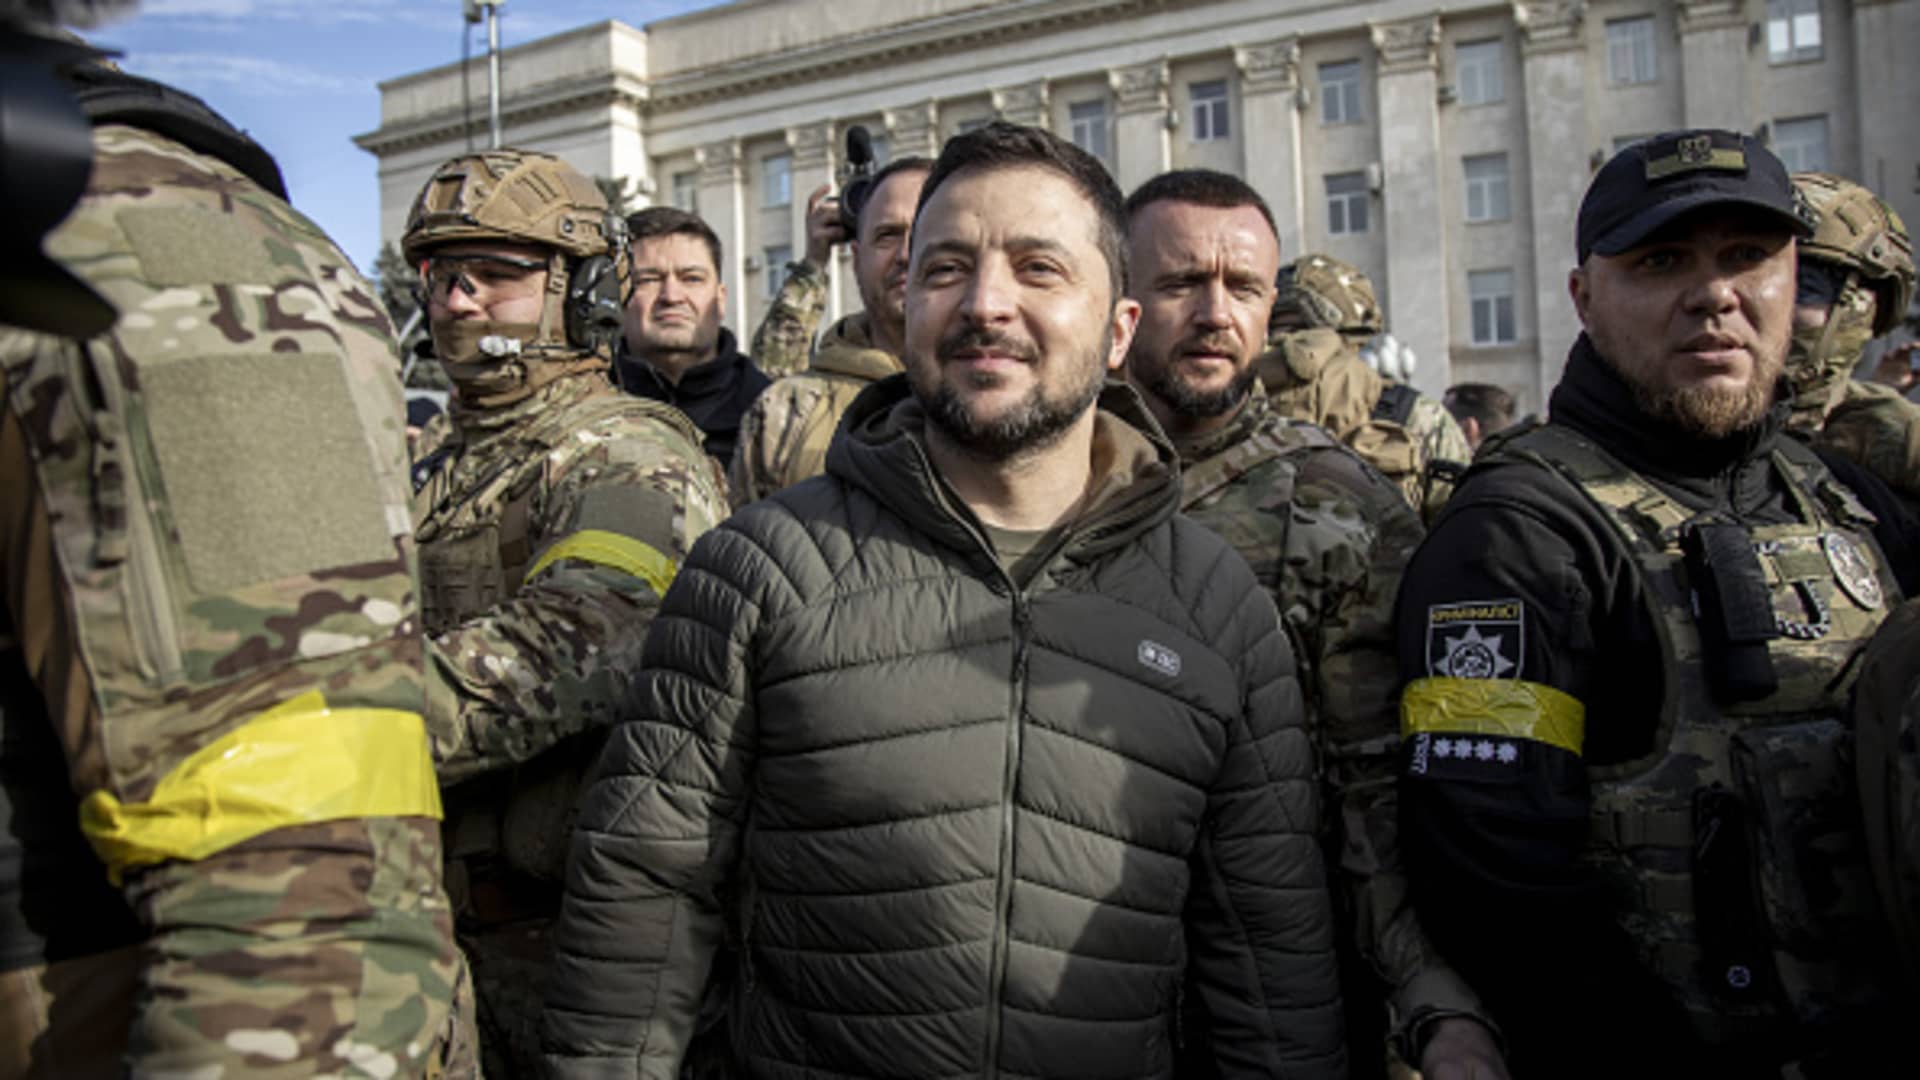 Ukrainian President Volodymr Zelenskyy visits Kherson City for first time after the withdrawal of Russian troops in Ukraine, November 13th, 2022.